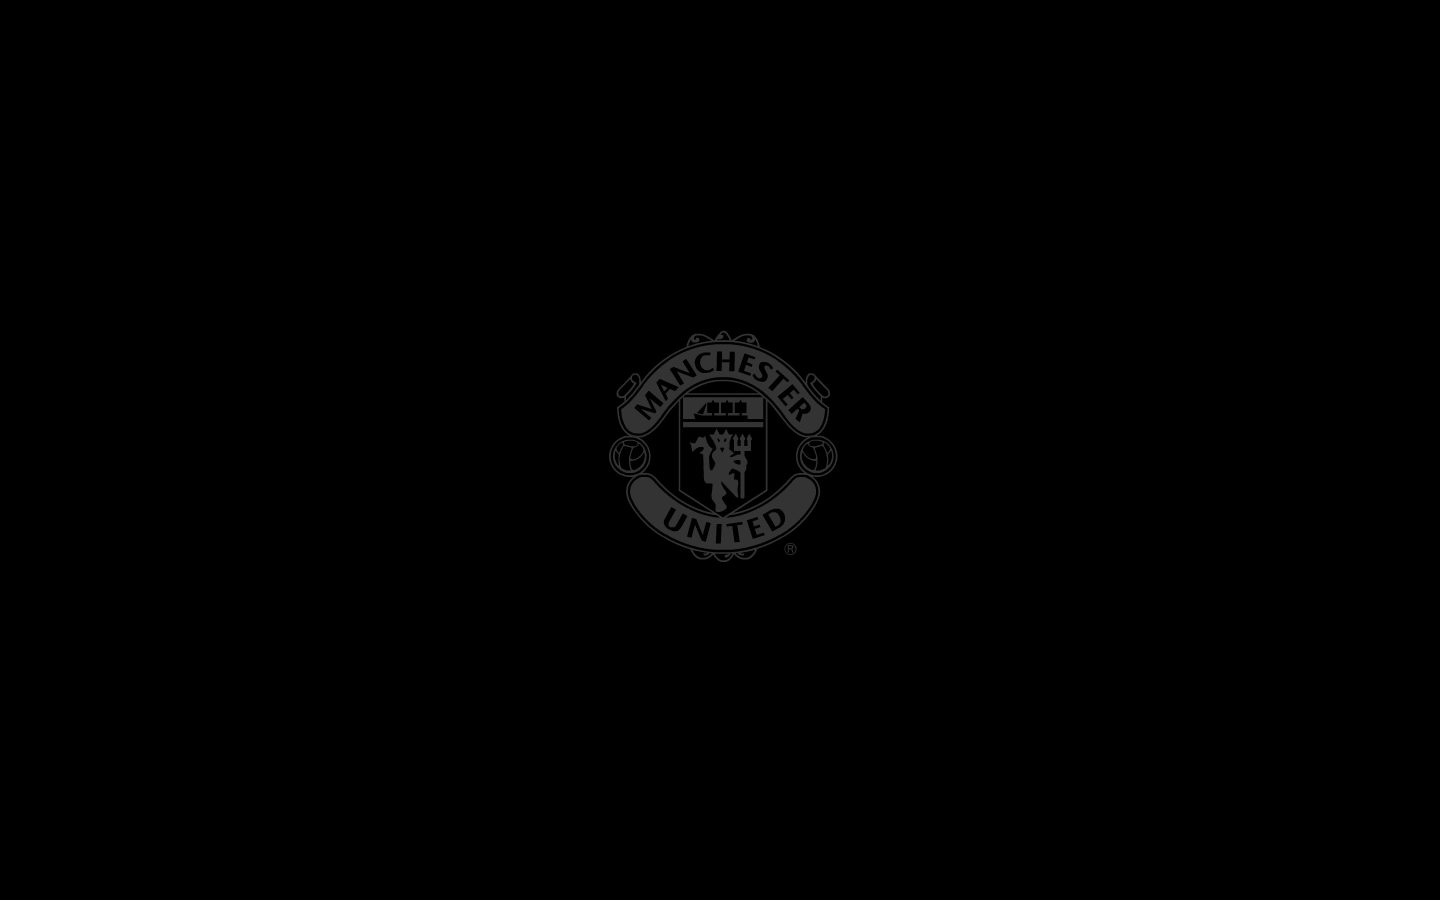 Manchester United Black Wallpapers - Top Free Manchester United ...